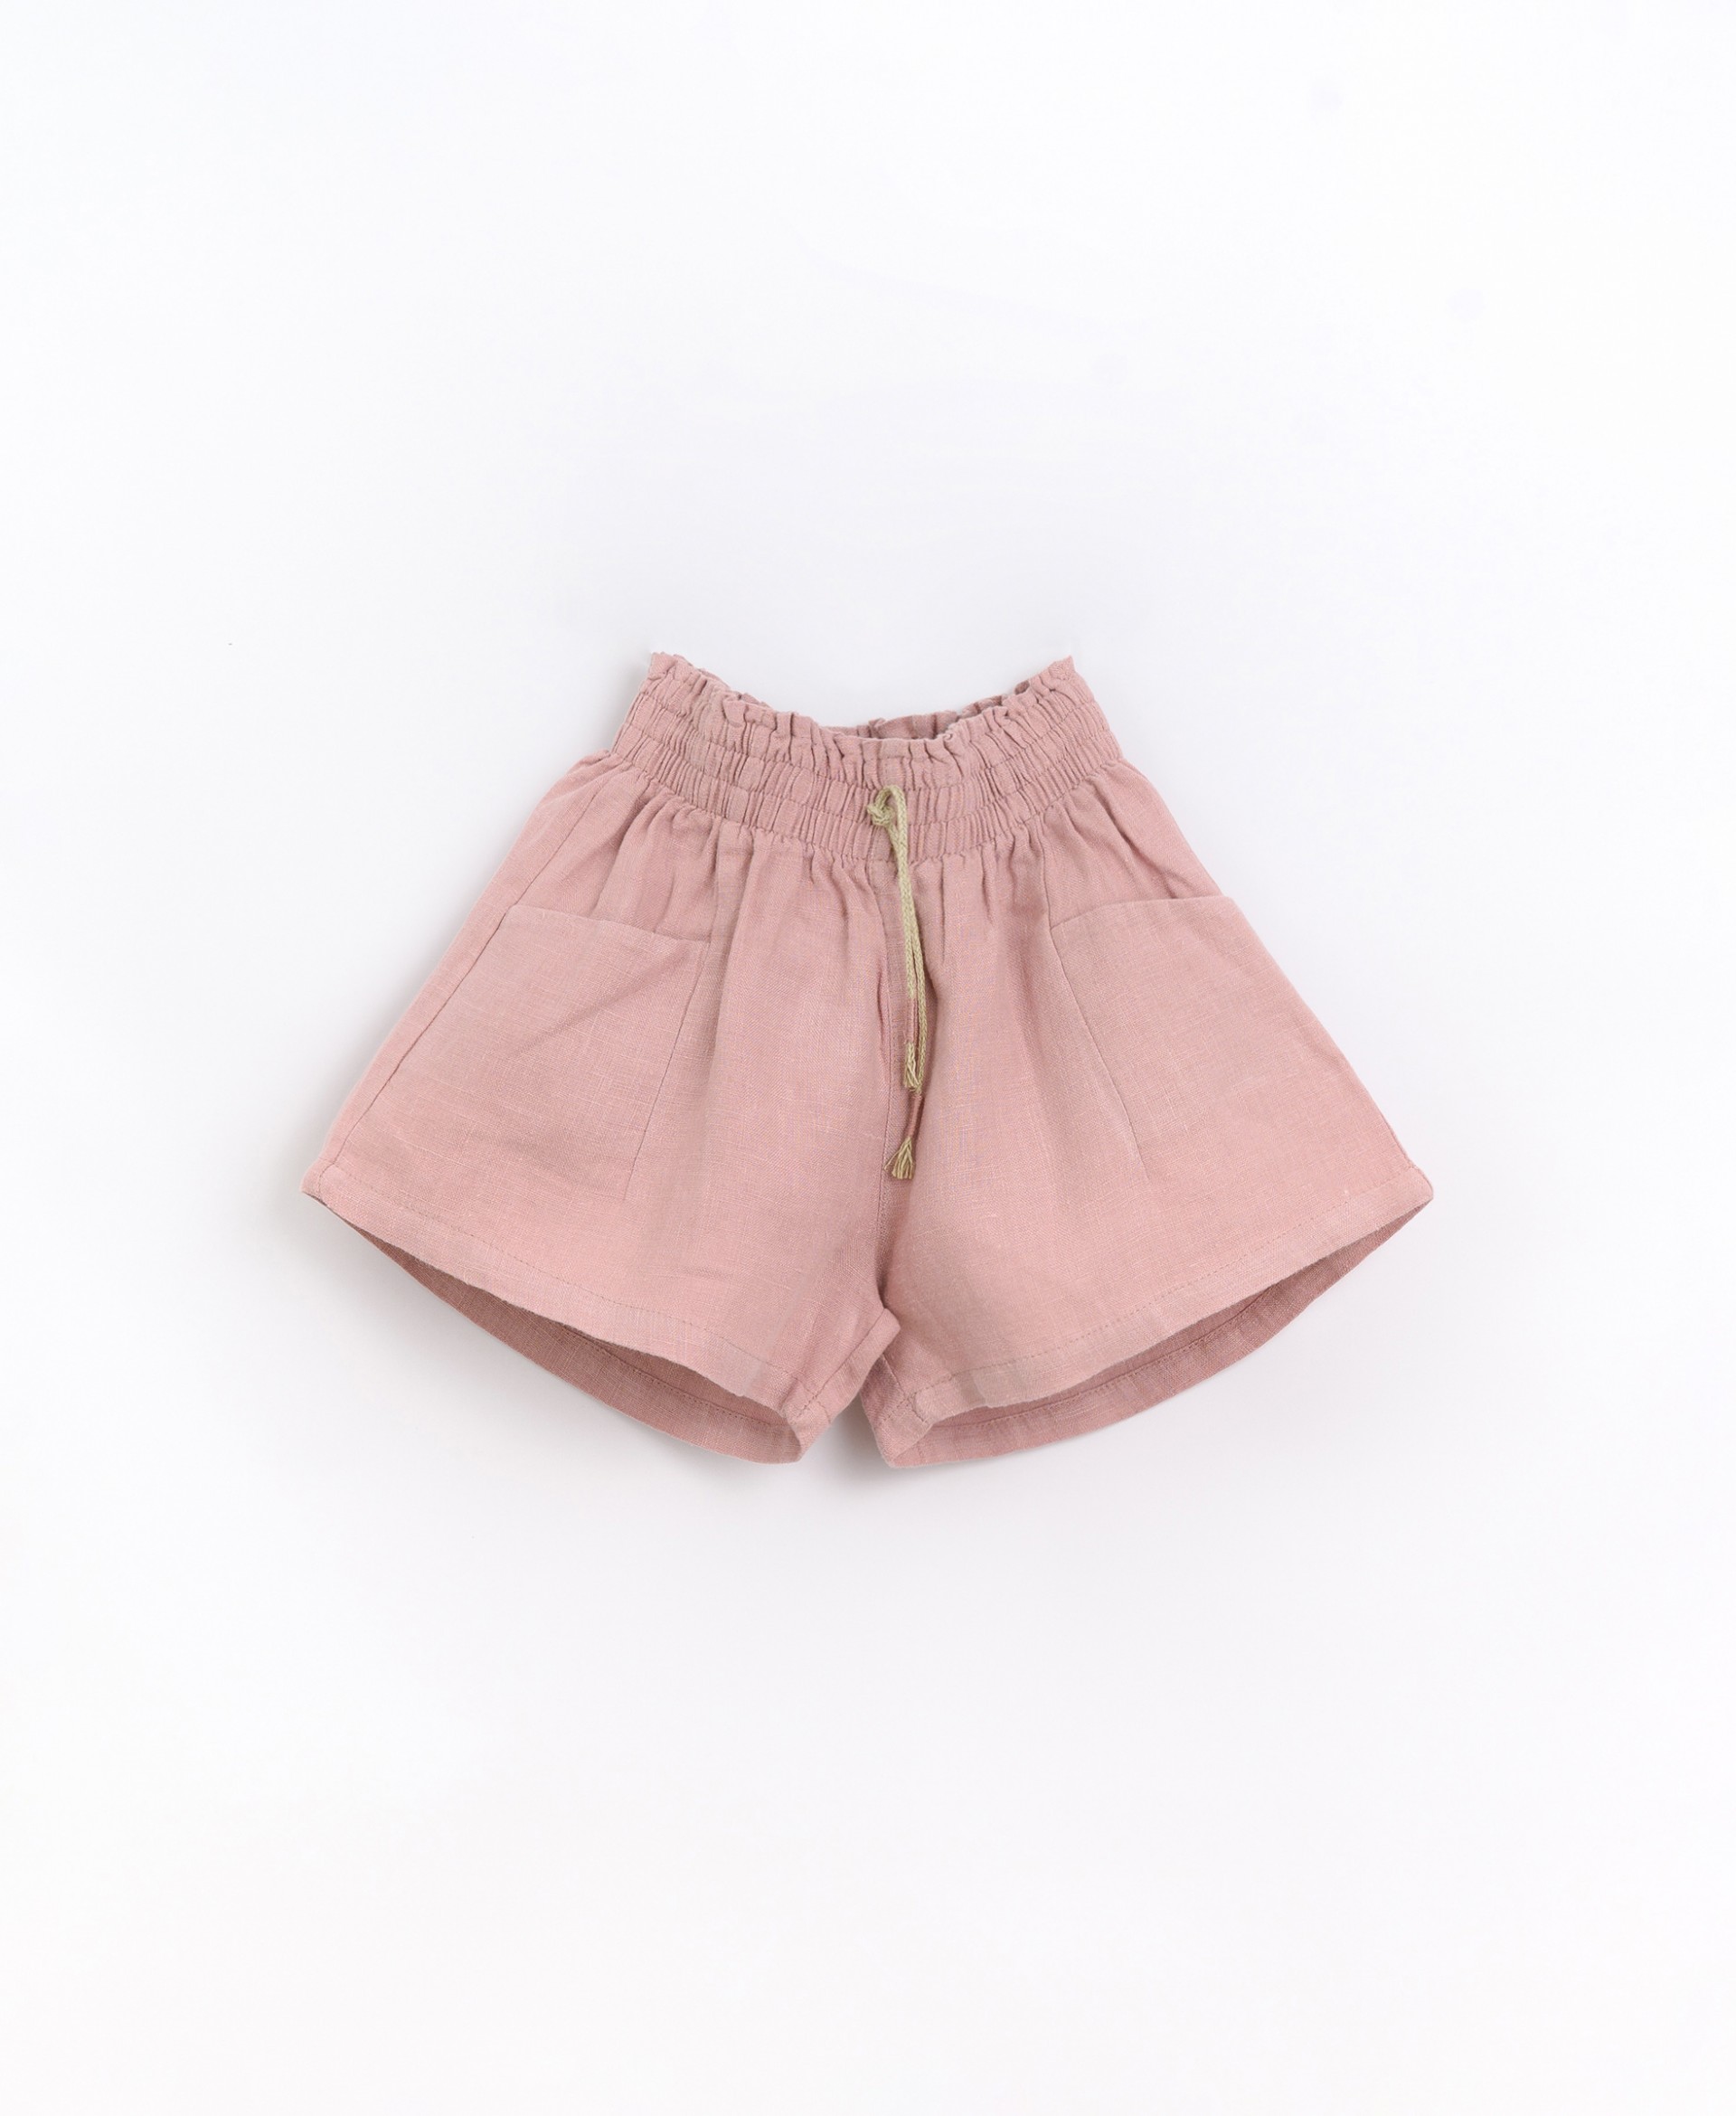 Shorts with pockets and decorative drawstring | Basketry